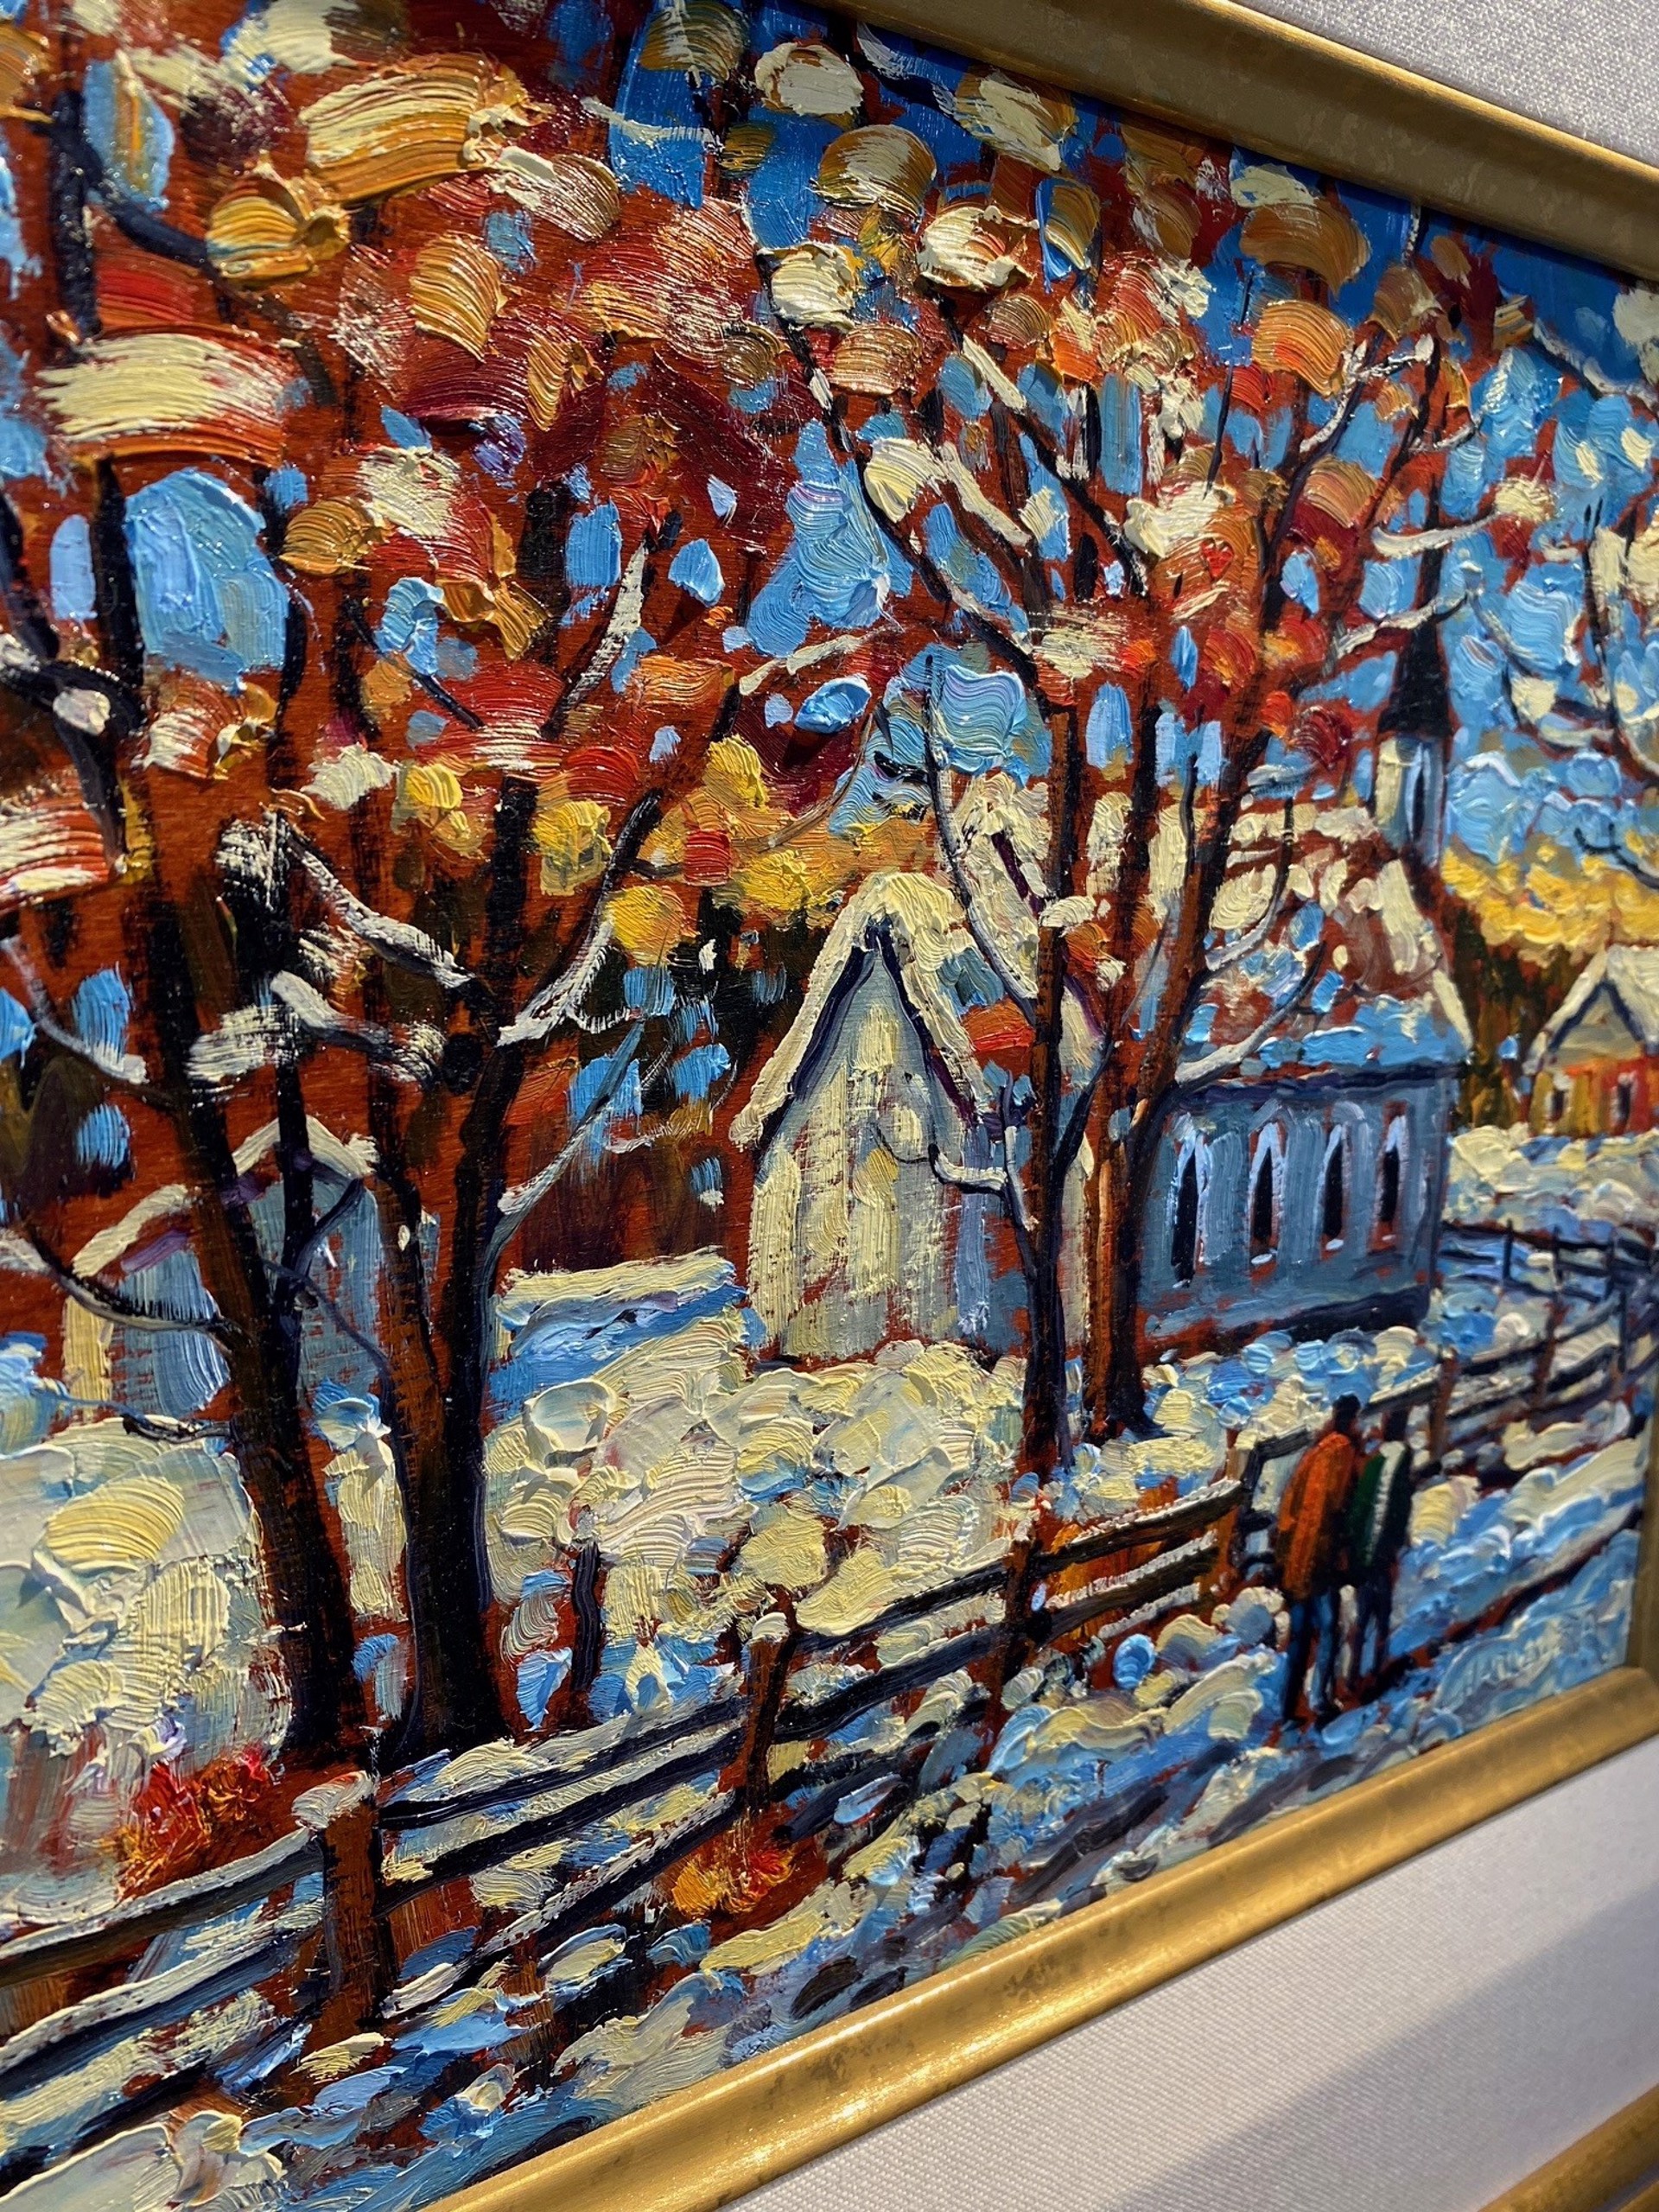 Rod Charlesworth - Early Snow by HISTORICAL ART